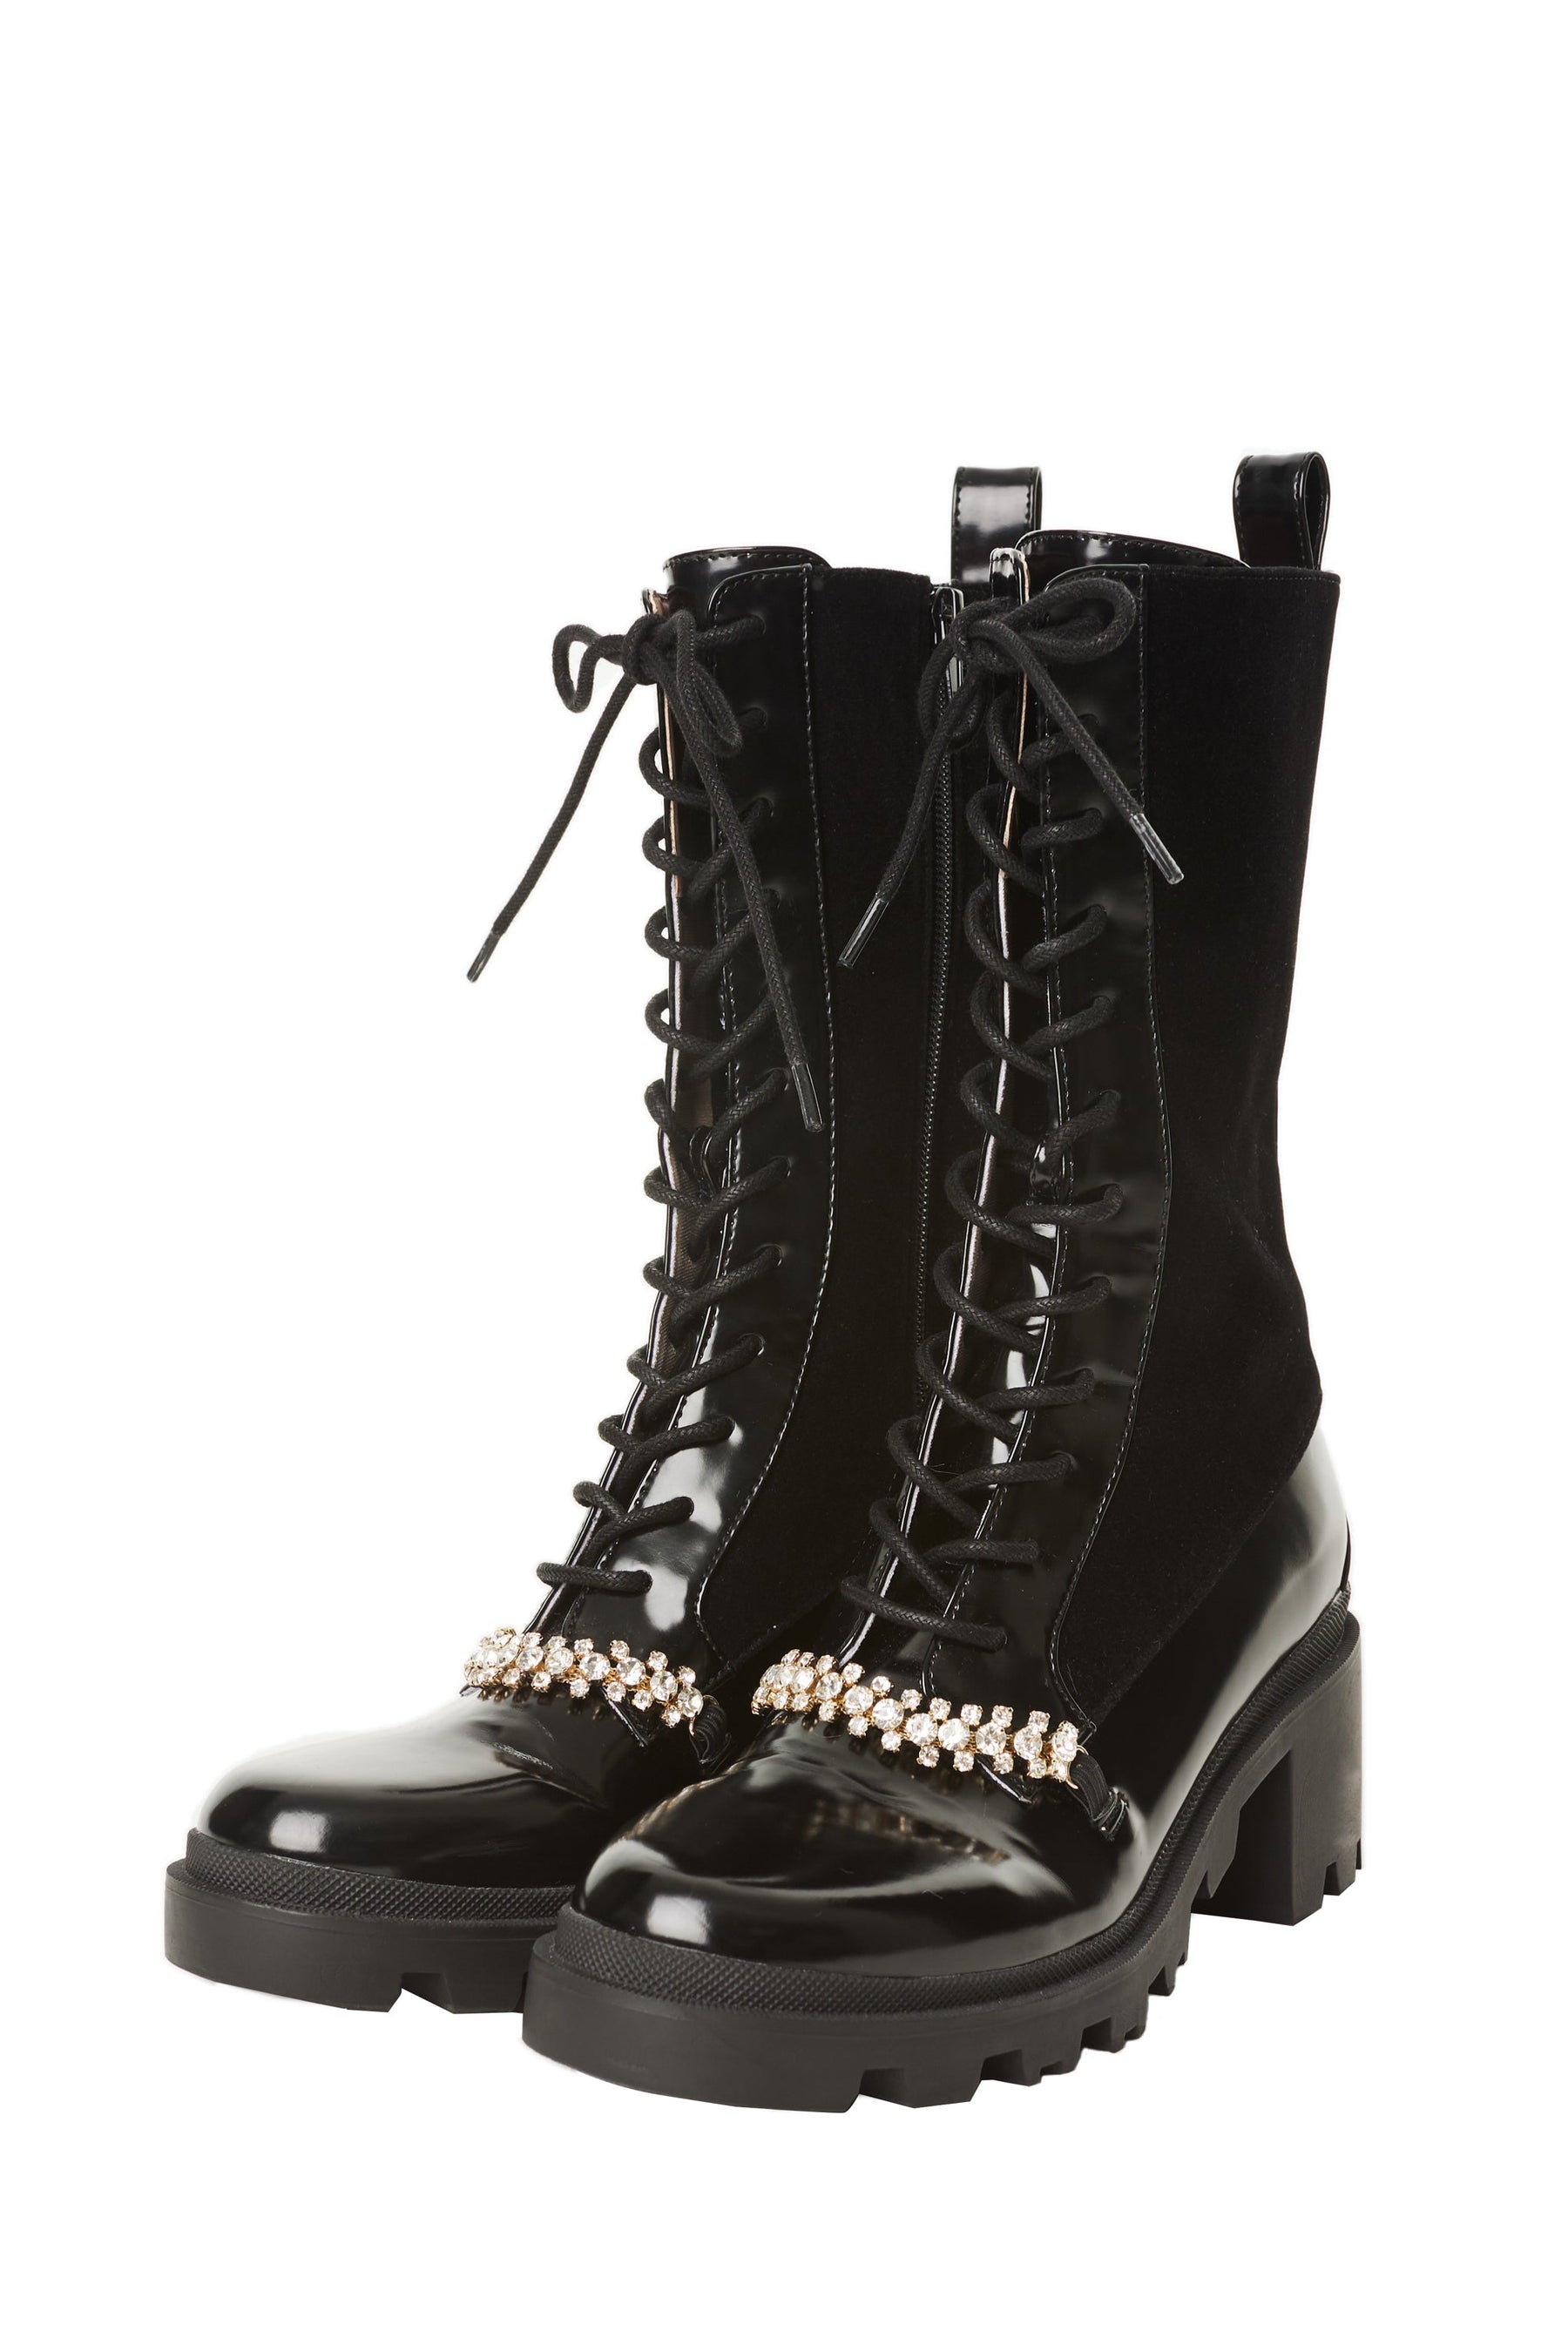 Her lip to♡Crystal Lace-Up Ankle Boots36 - ブーツ